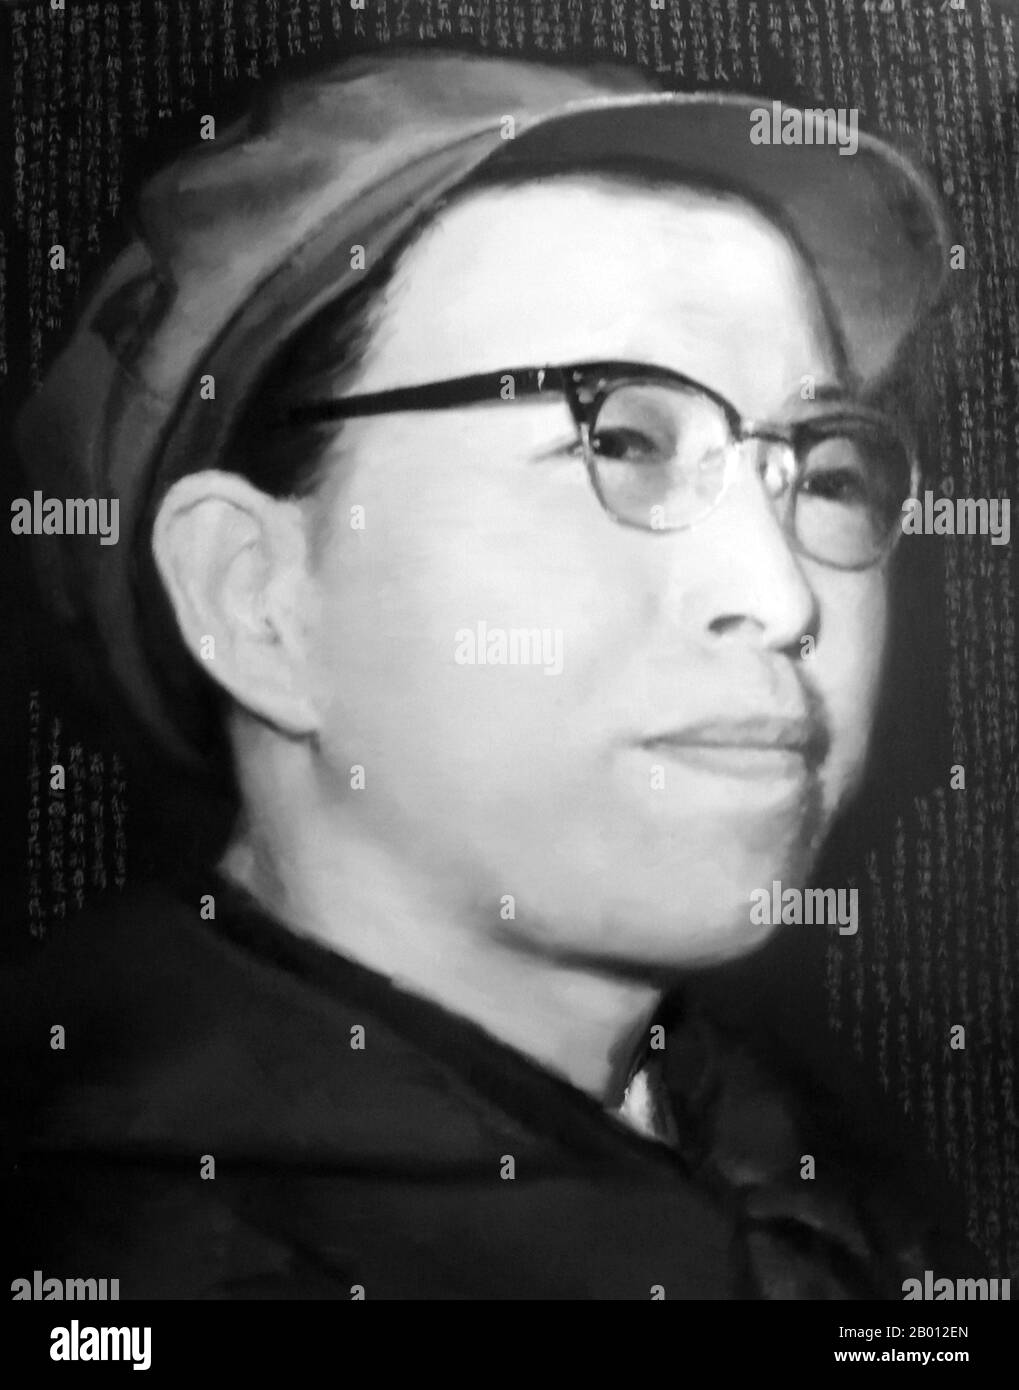 China: Jiang Qing (1914-1991), also known as Madame Mao, at the height of her power in the Cultural Revolution, c. 1969.  Jiang Qing (Chiang Ch'ing, March 1914  – May 14, 1991) was the pseudonym that was used by Chinese leader Mao Zedong's last wife and major Communist Party of China power figure.  She went by the stage name Lan Ping during her acting career, and was known by various other names during her life. She married Mao in Yan'an in November 1938, and is sometimes referred to as Madame Mao in Western literature, serving as Communist China's first first lady. Stock Photo